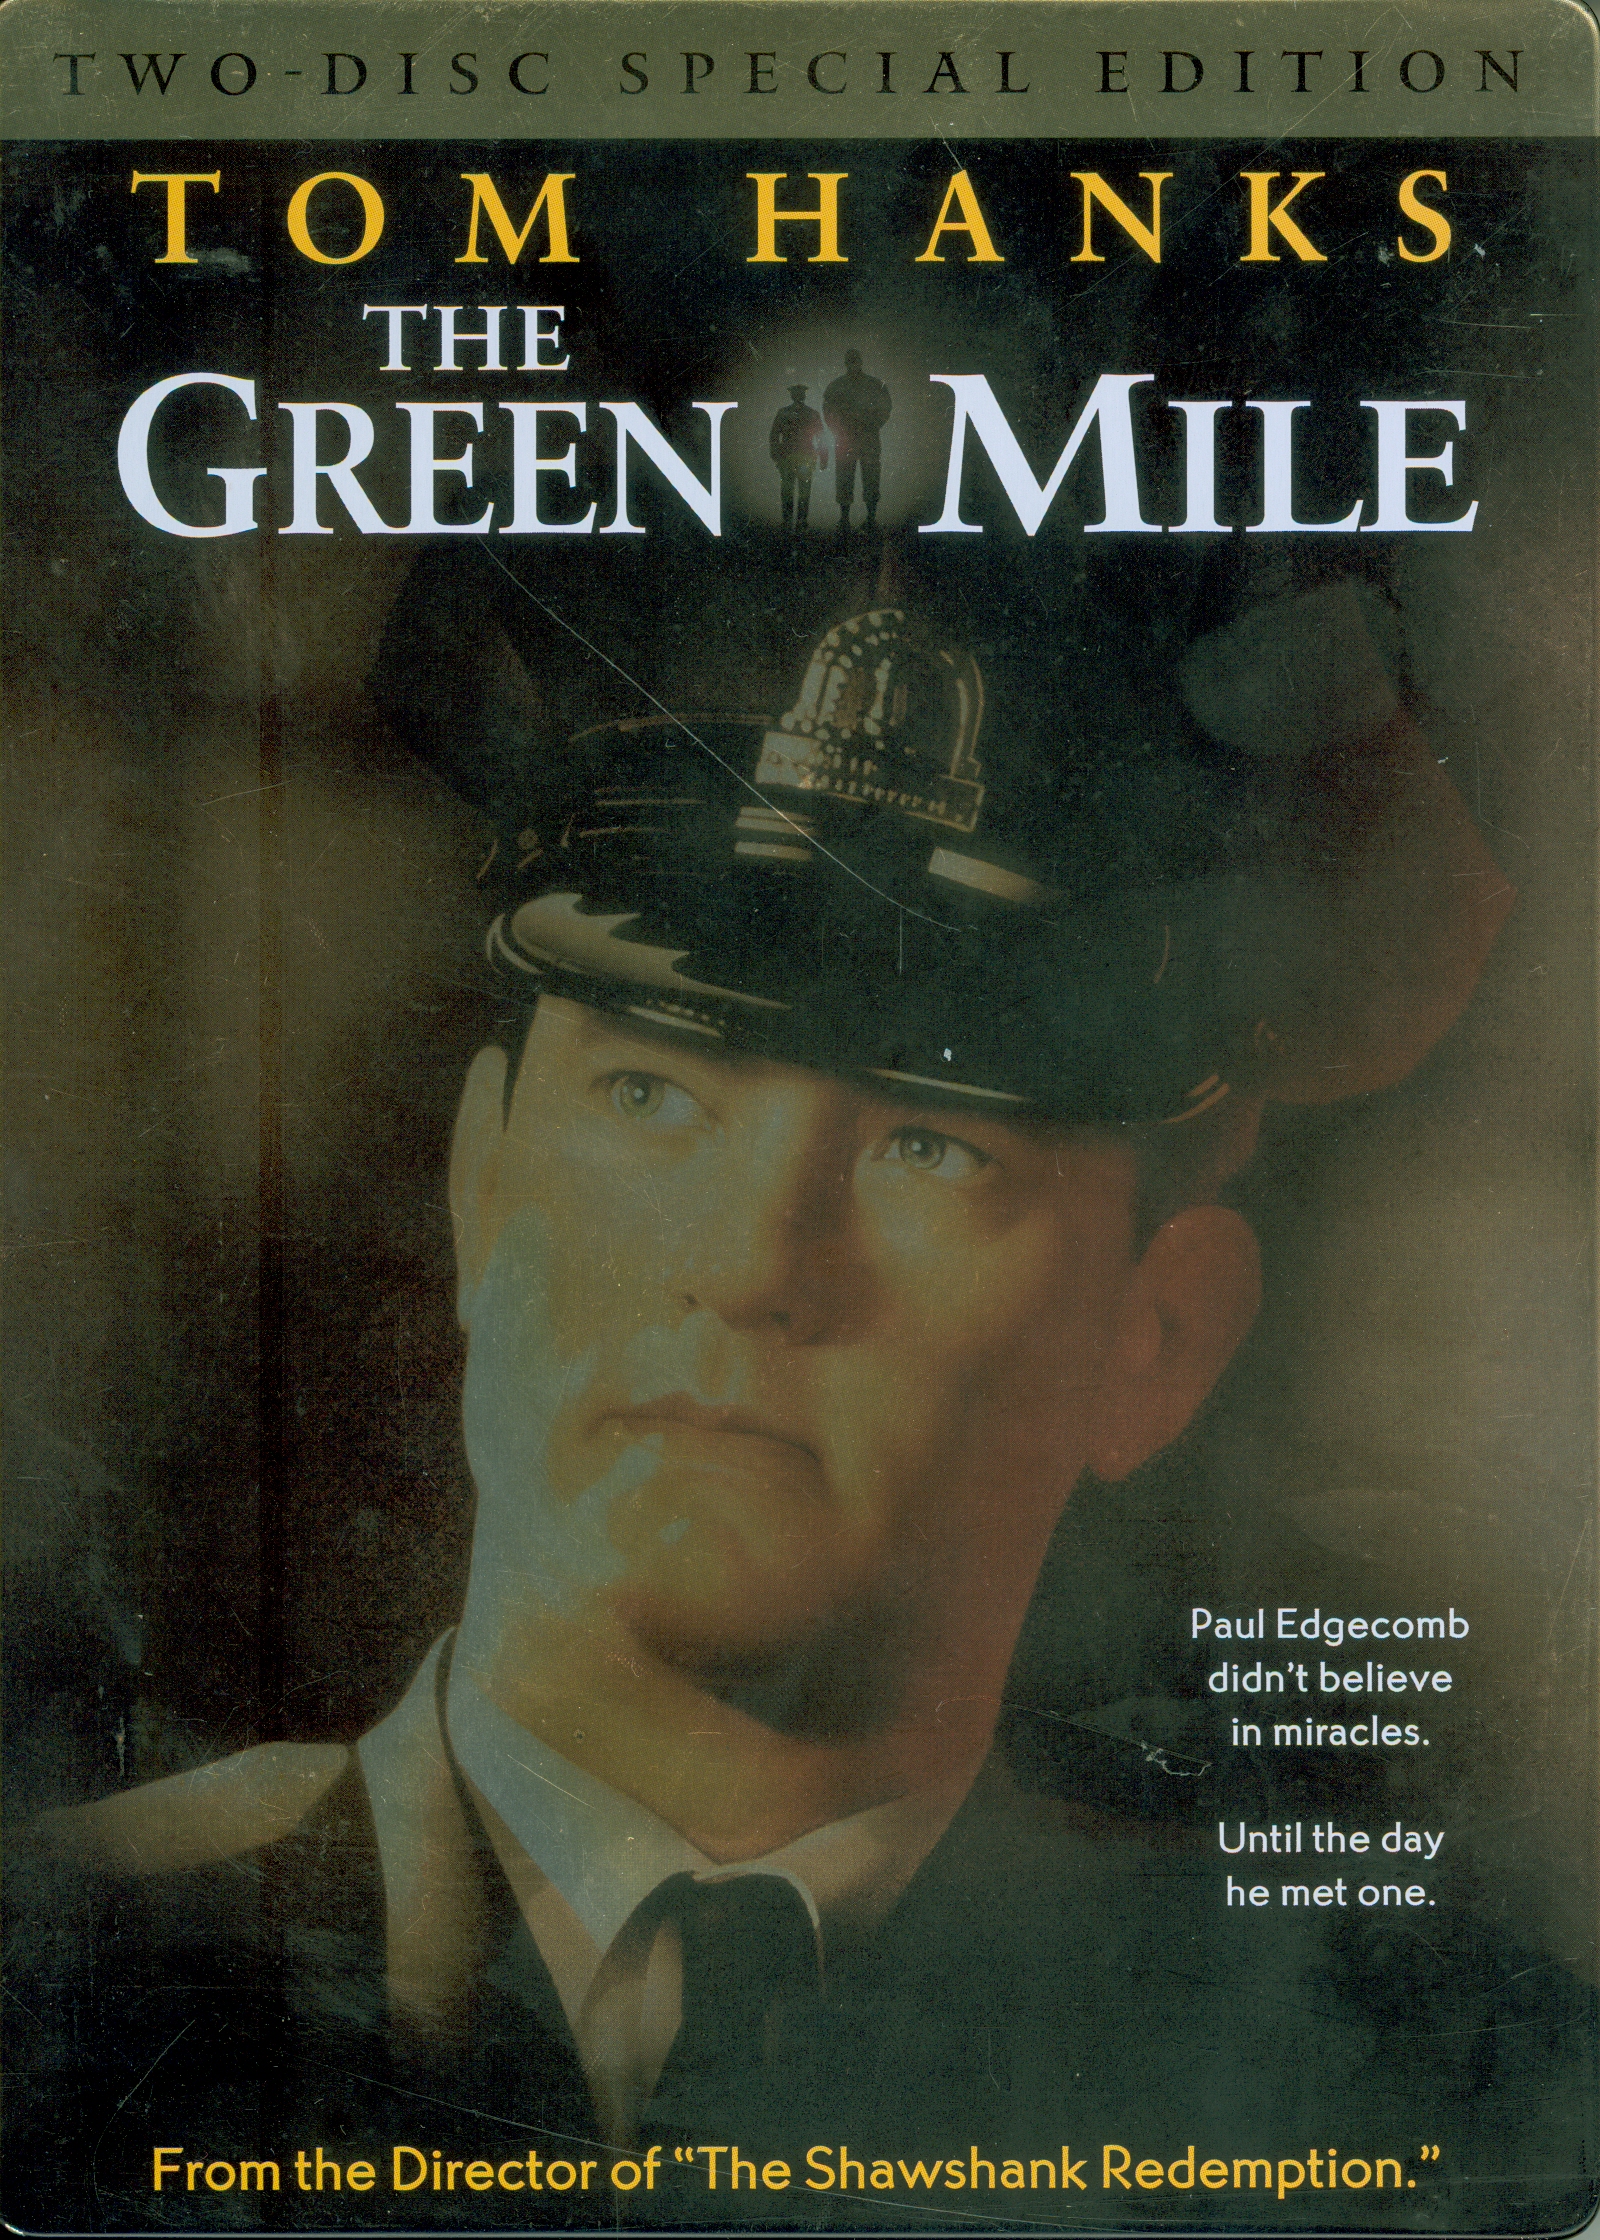  The green mile